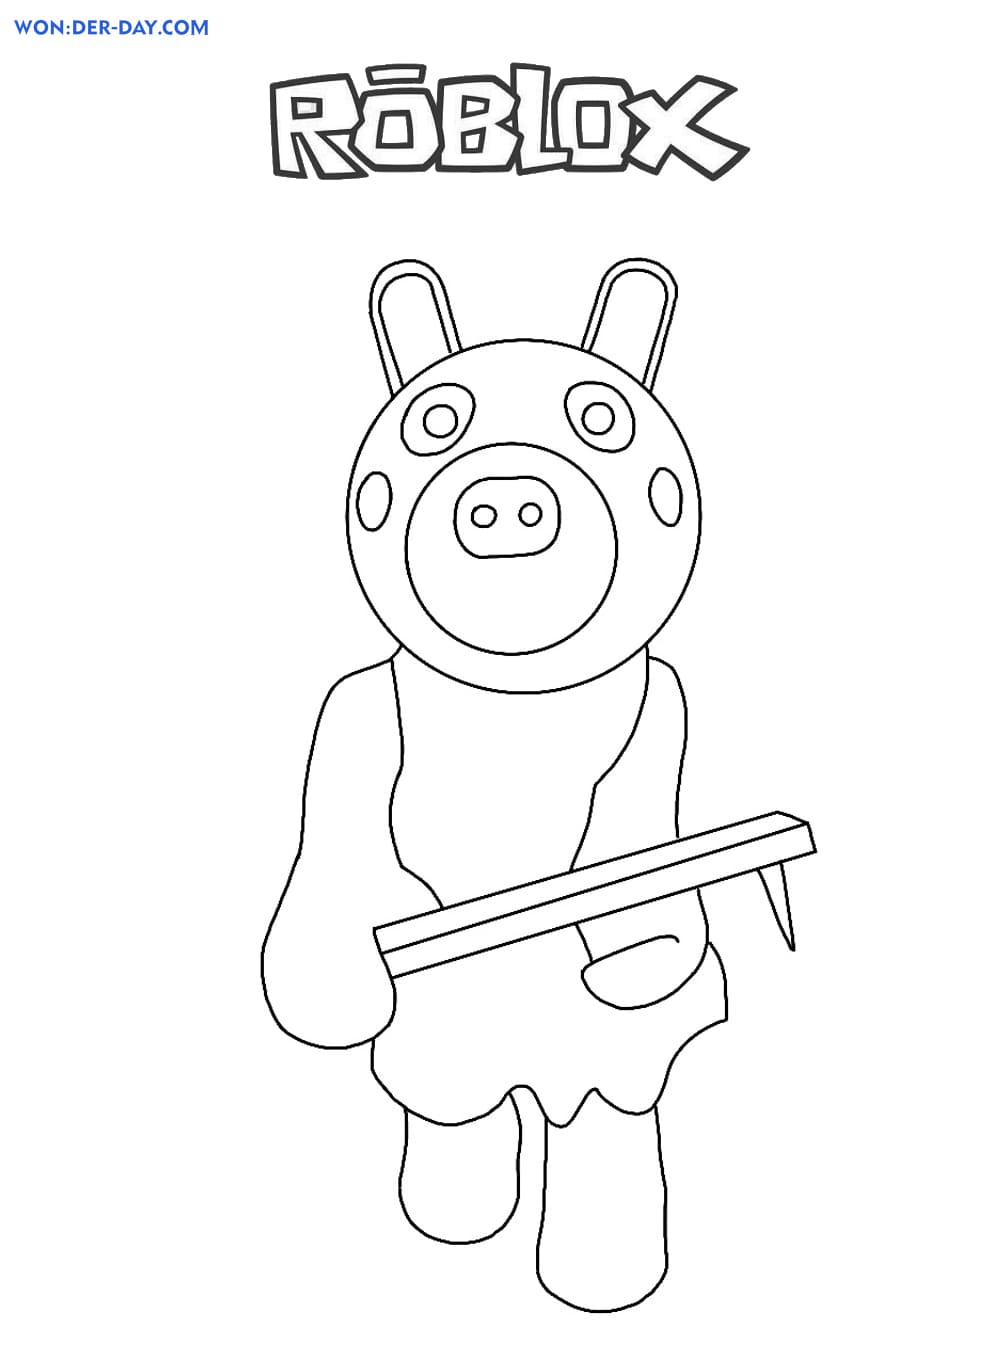 Piggy Roblox Coloring Pages Wonder Day Coloring Pages For Children And Adults - roblox piggy officer doggy drawing